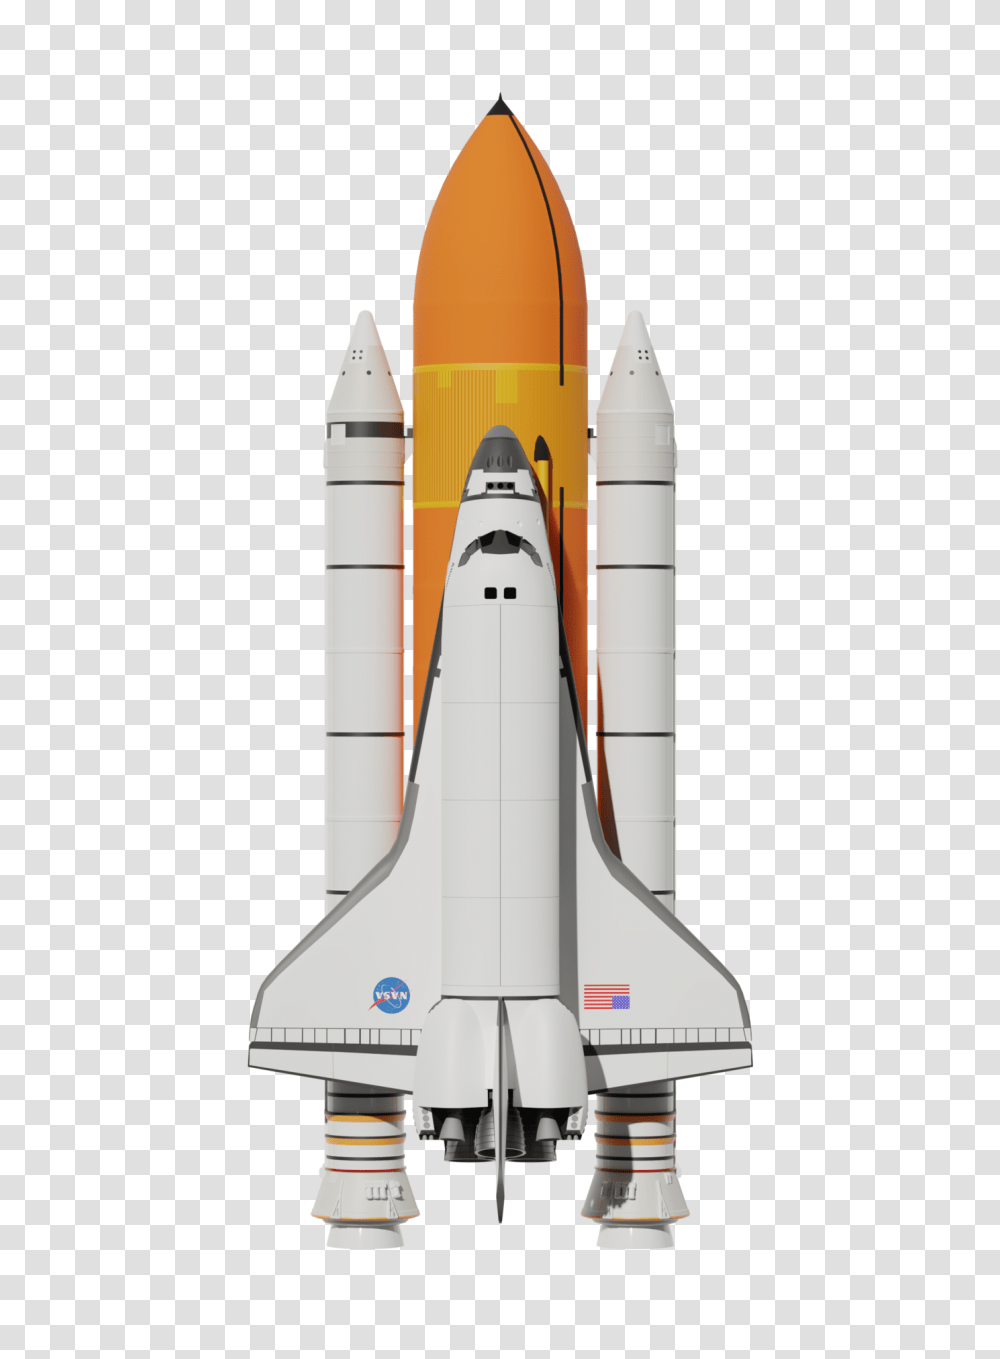 Download Space Shuttle Boosters And Fuel Tank Fuel Space Kennedy Space Center, Rocket, Vehicle, Transportation, Spaceship Transparent Png